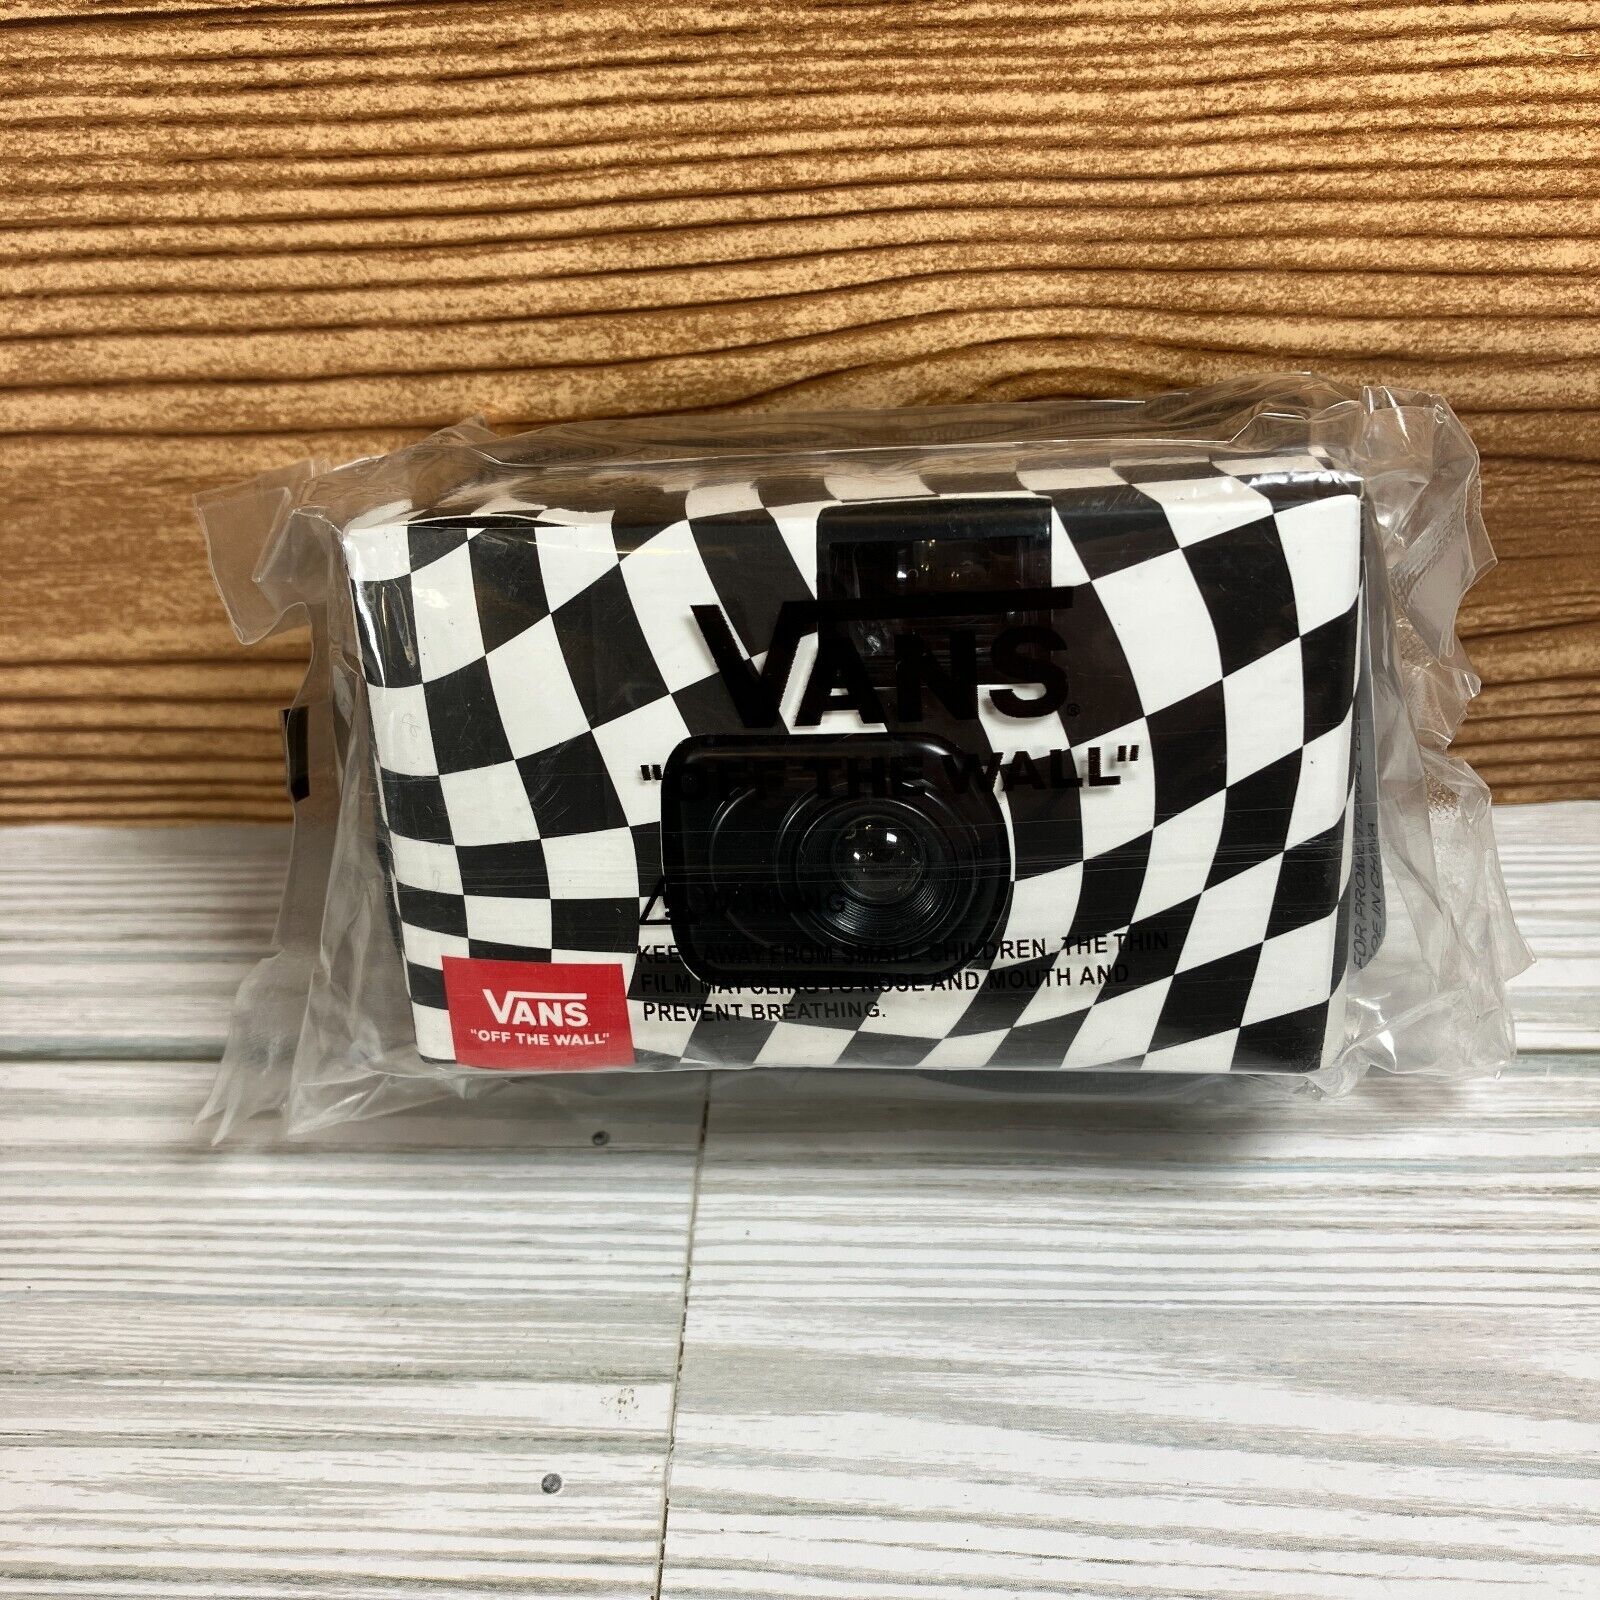 Vans Off the Wall Disposable 35mm Camera With Black Case Sealed VANS Disposible